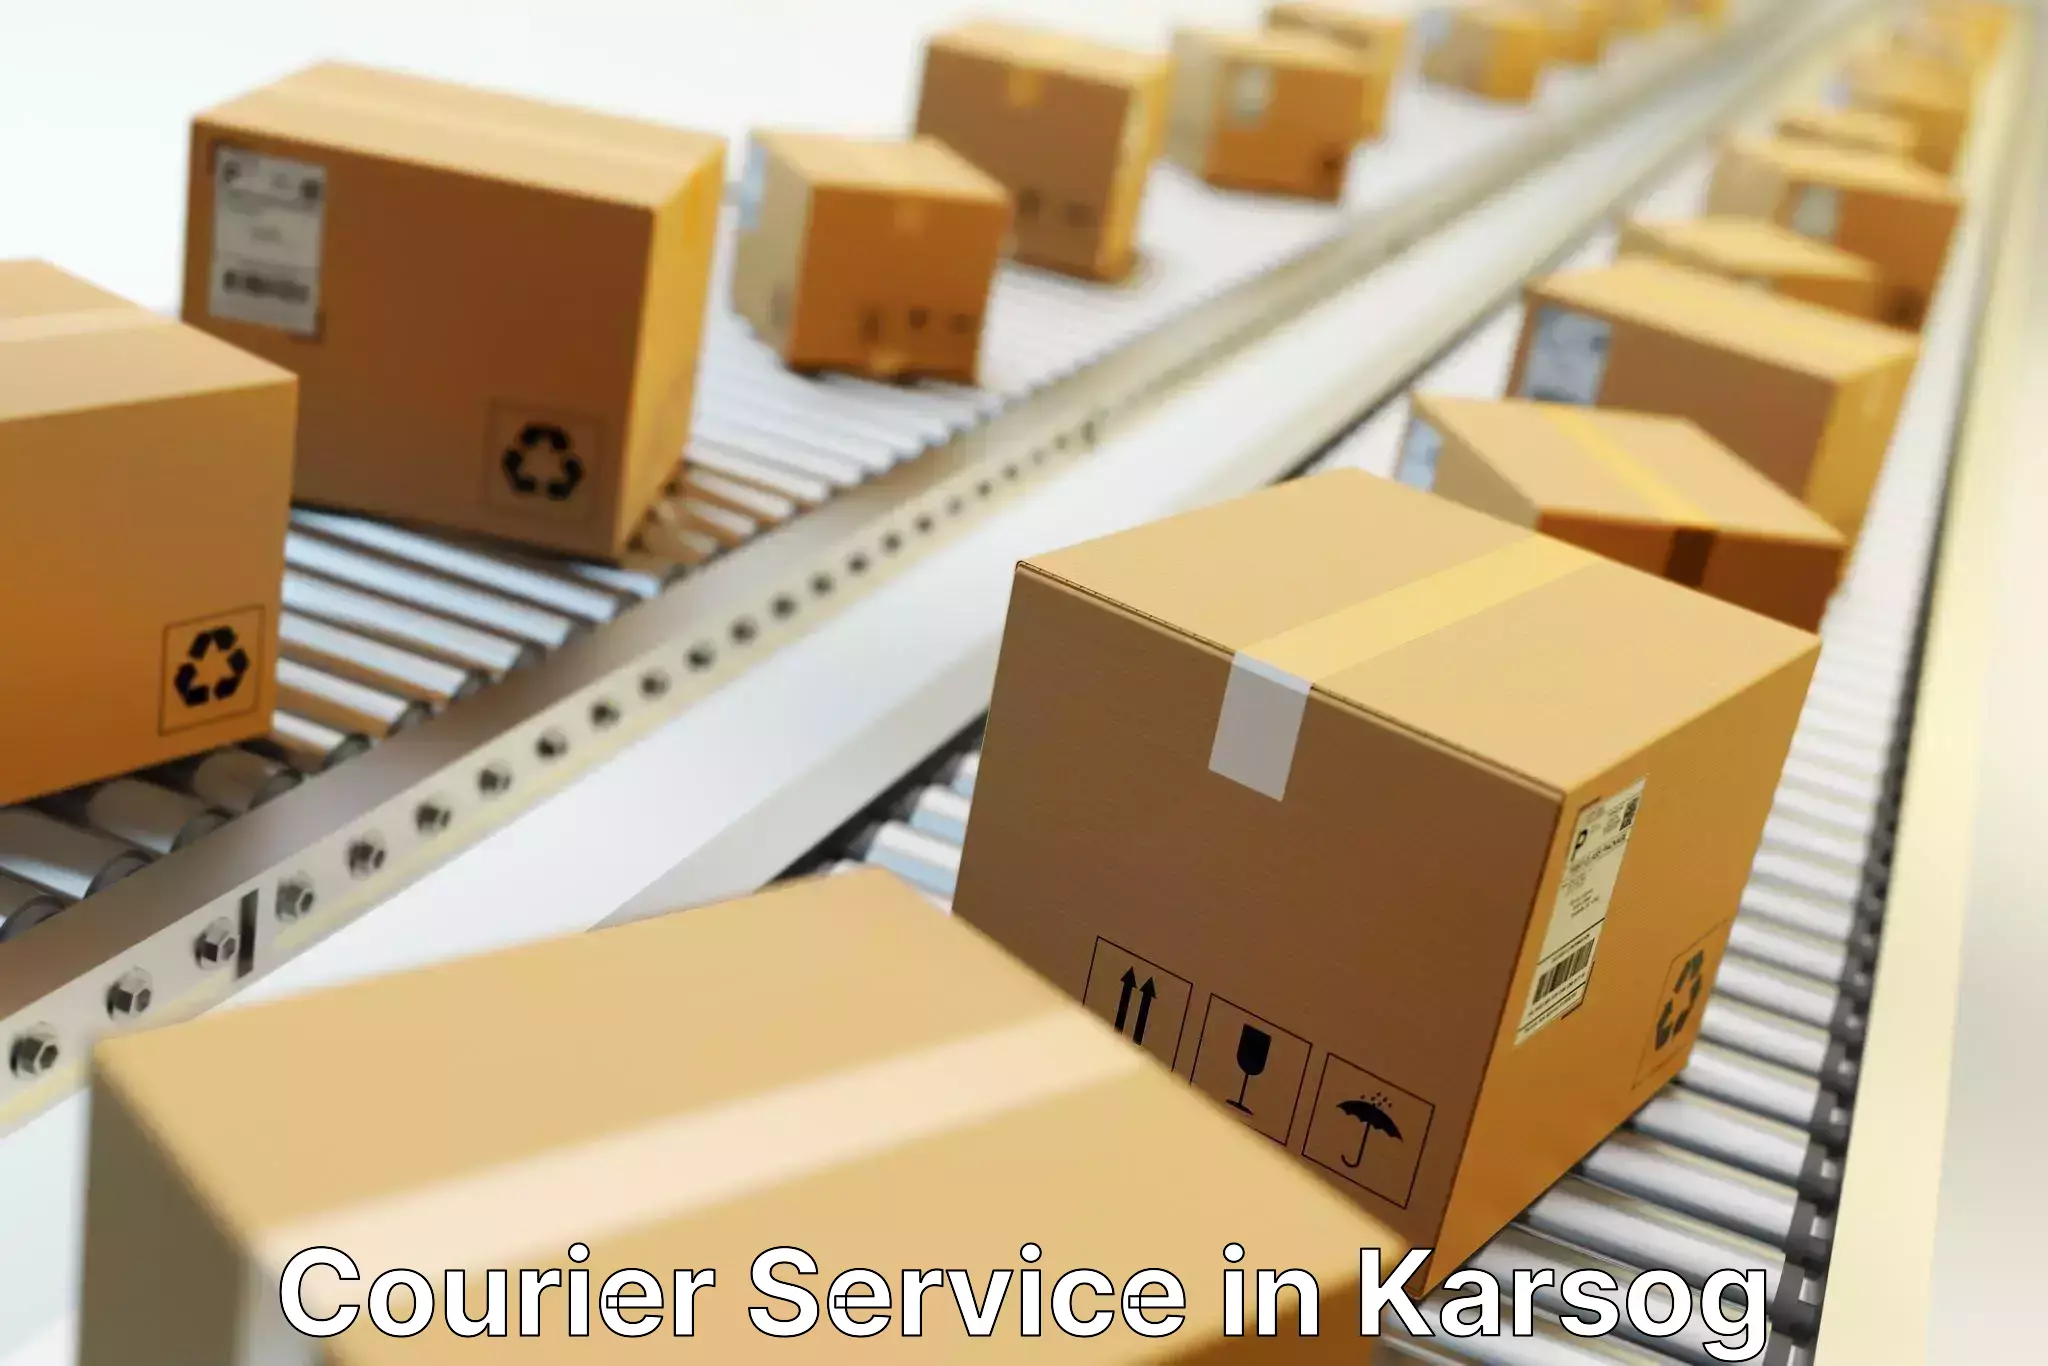 State-of-the-art courier technology in Karsog